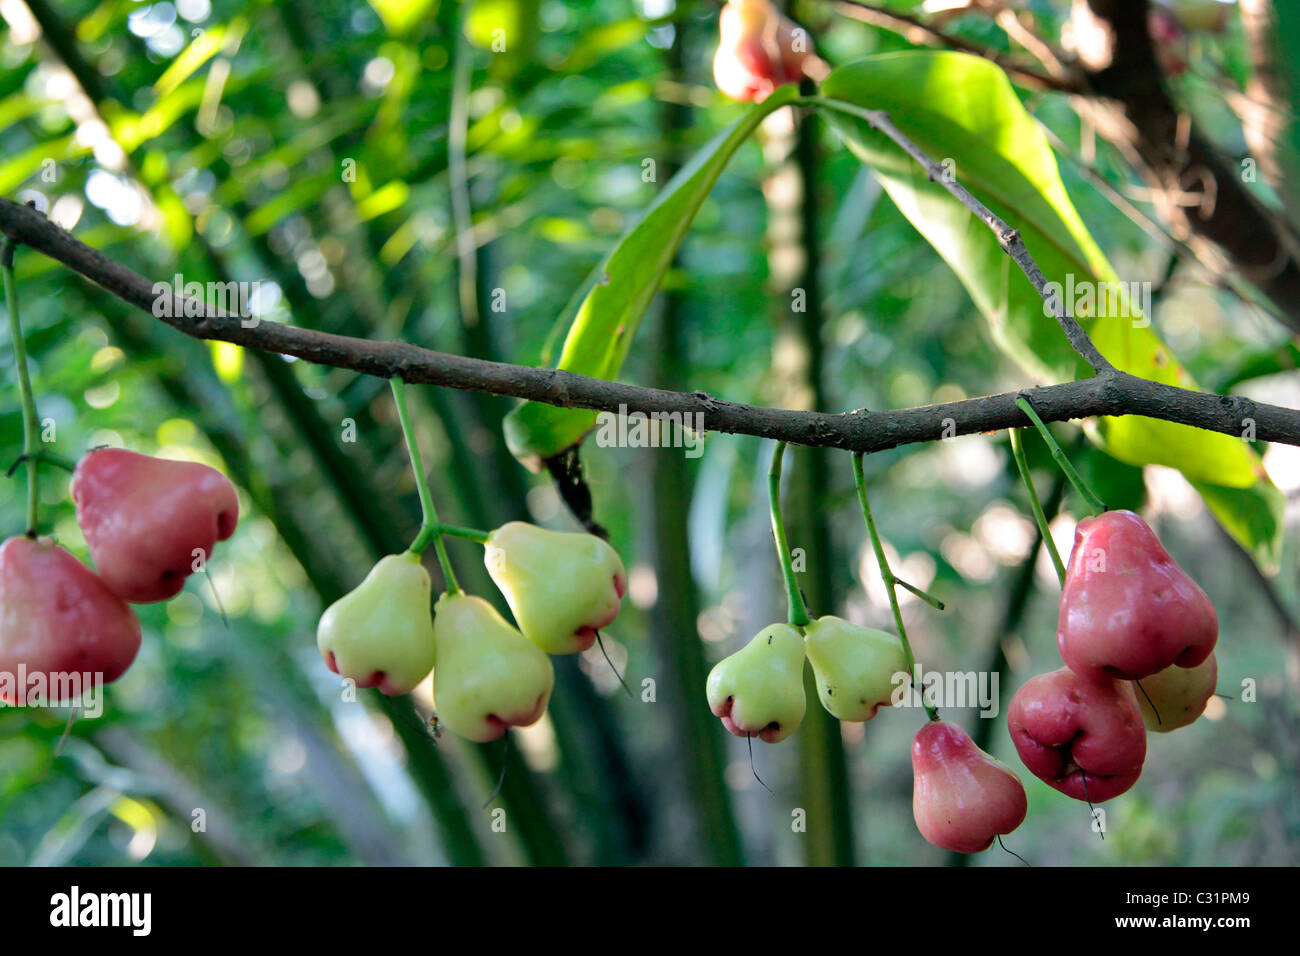 ROSE APPLES OR WATER APPLES, TROPICAL FRUIT GROWING ON THE SYZYGIUM JAMBOS TREE, THAILAND, ASIA Stock Photo